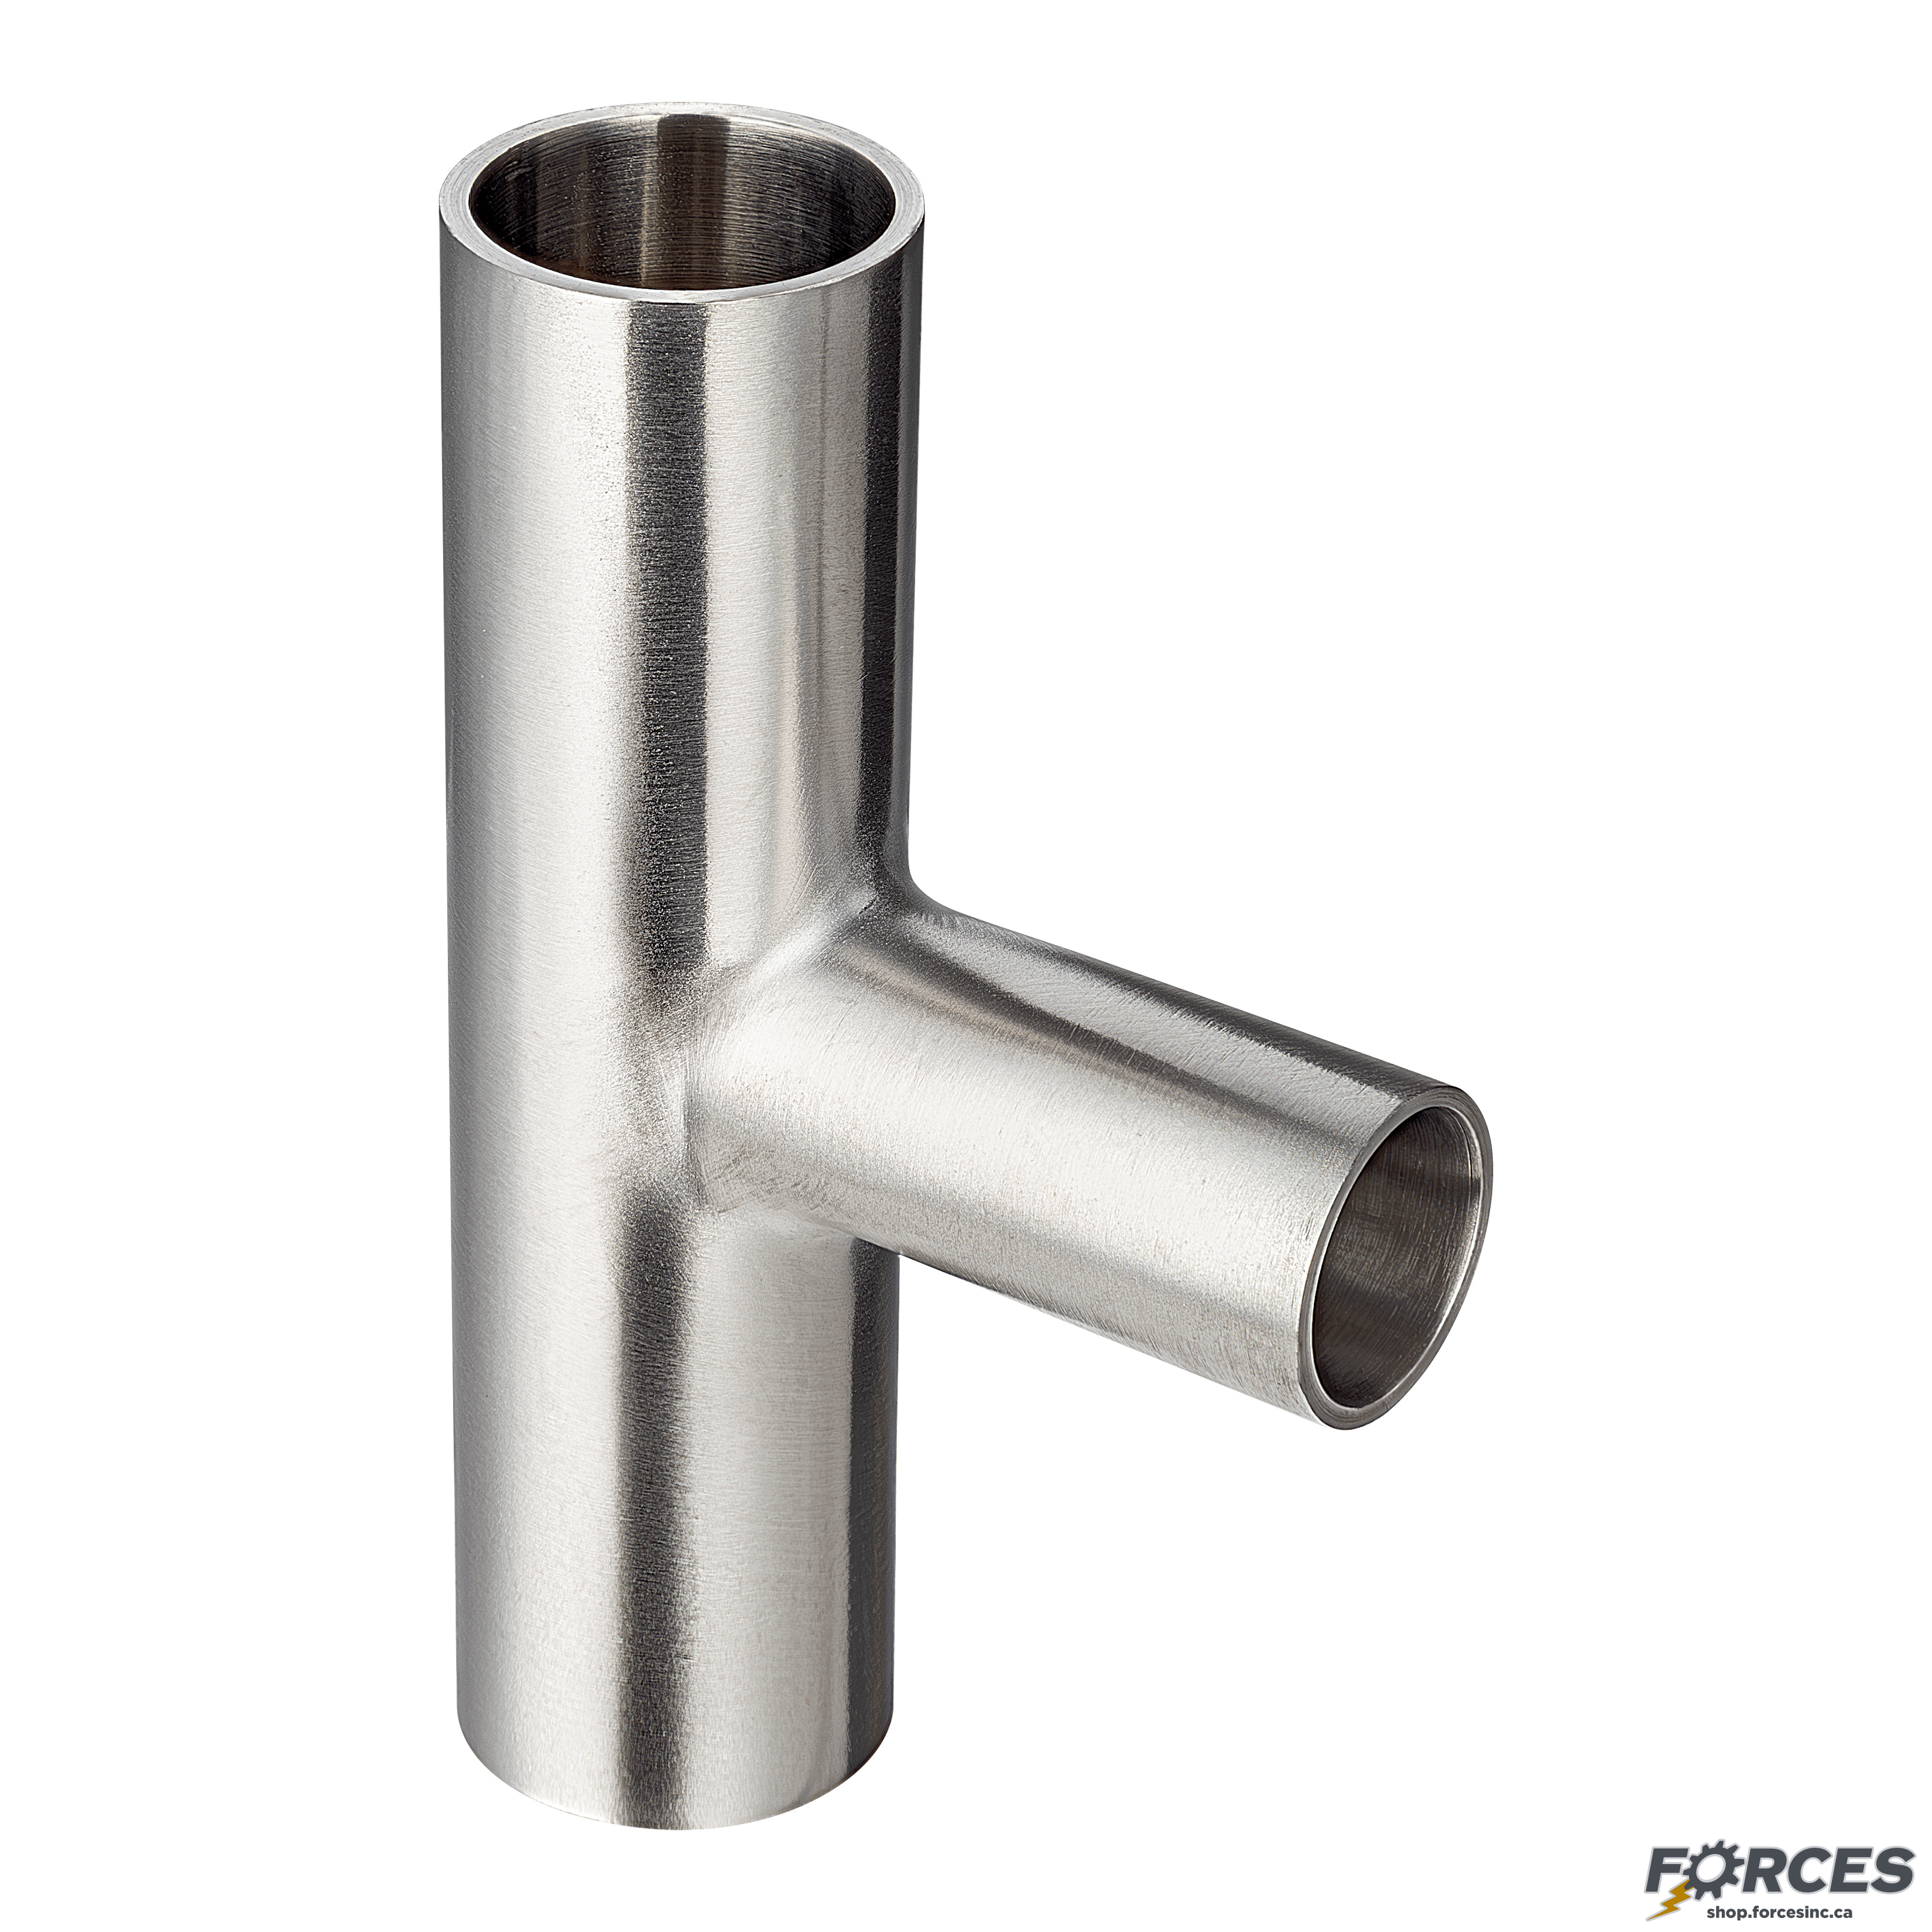 1" x 1/2" Butt Weld Tee Reducer - Stainless Steel 316 - Forces Inc